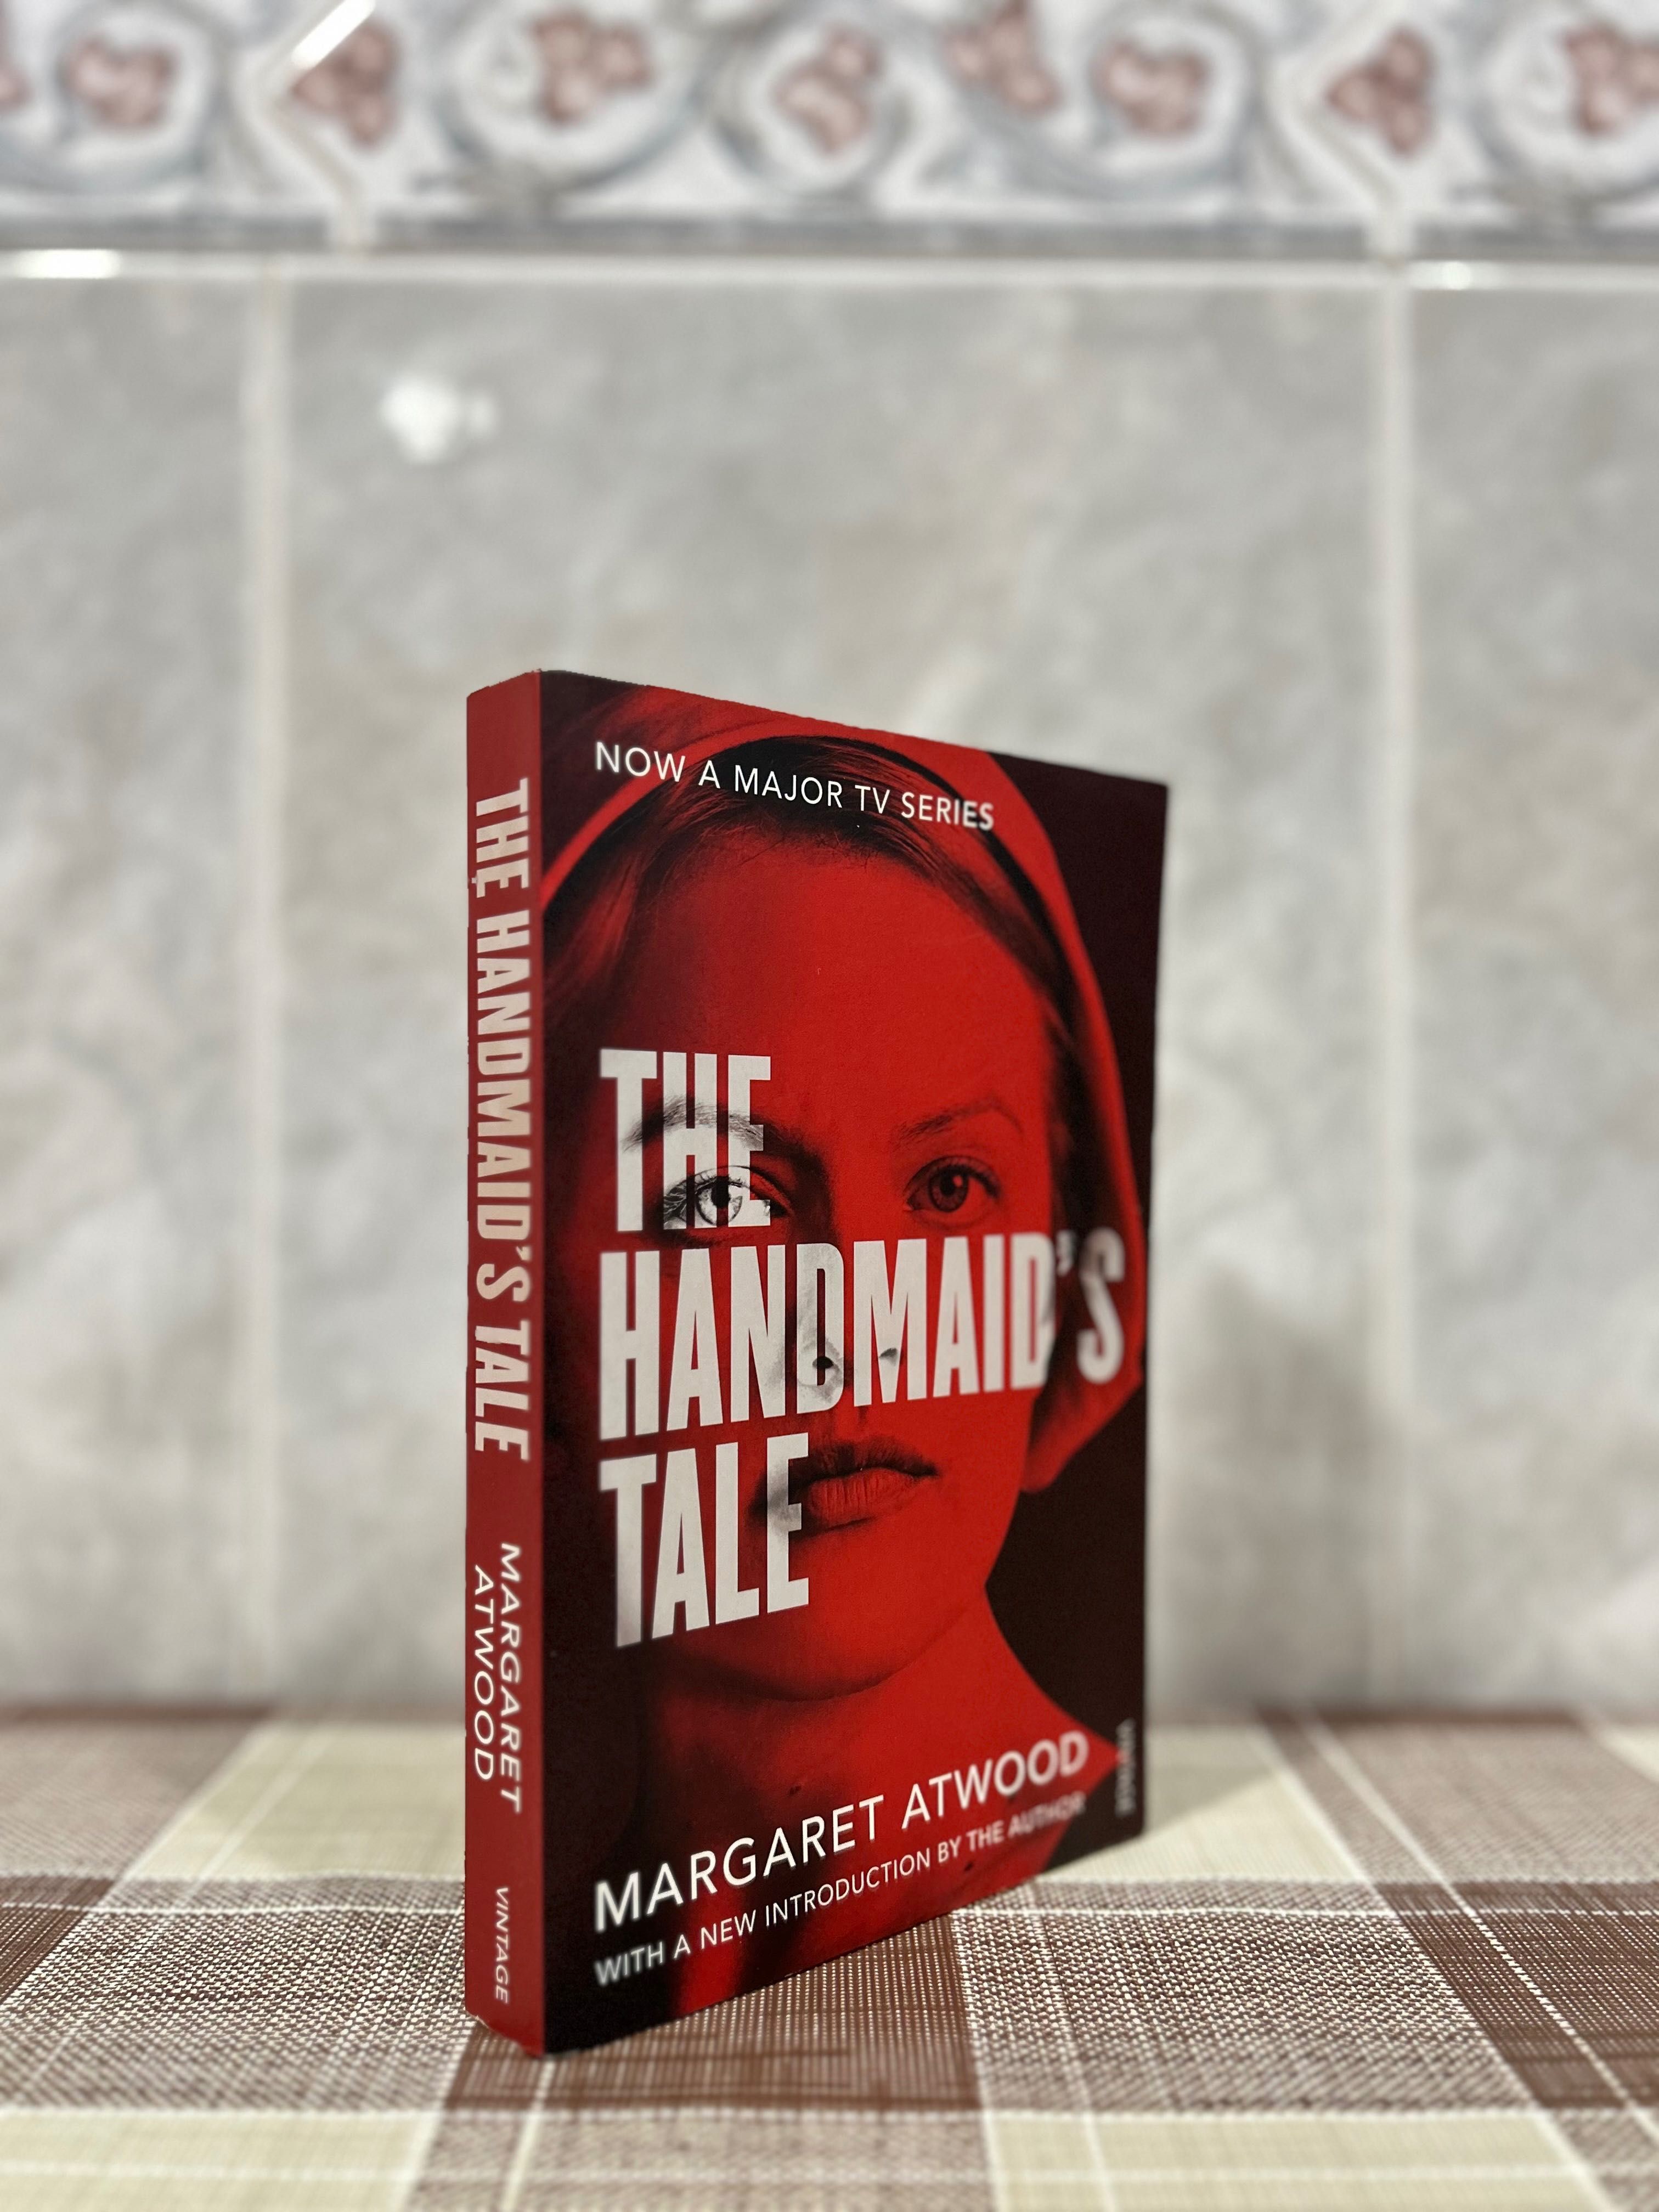 The Handmaid’s Tale (Inglês) - Margaret Atwood.